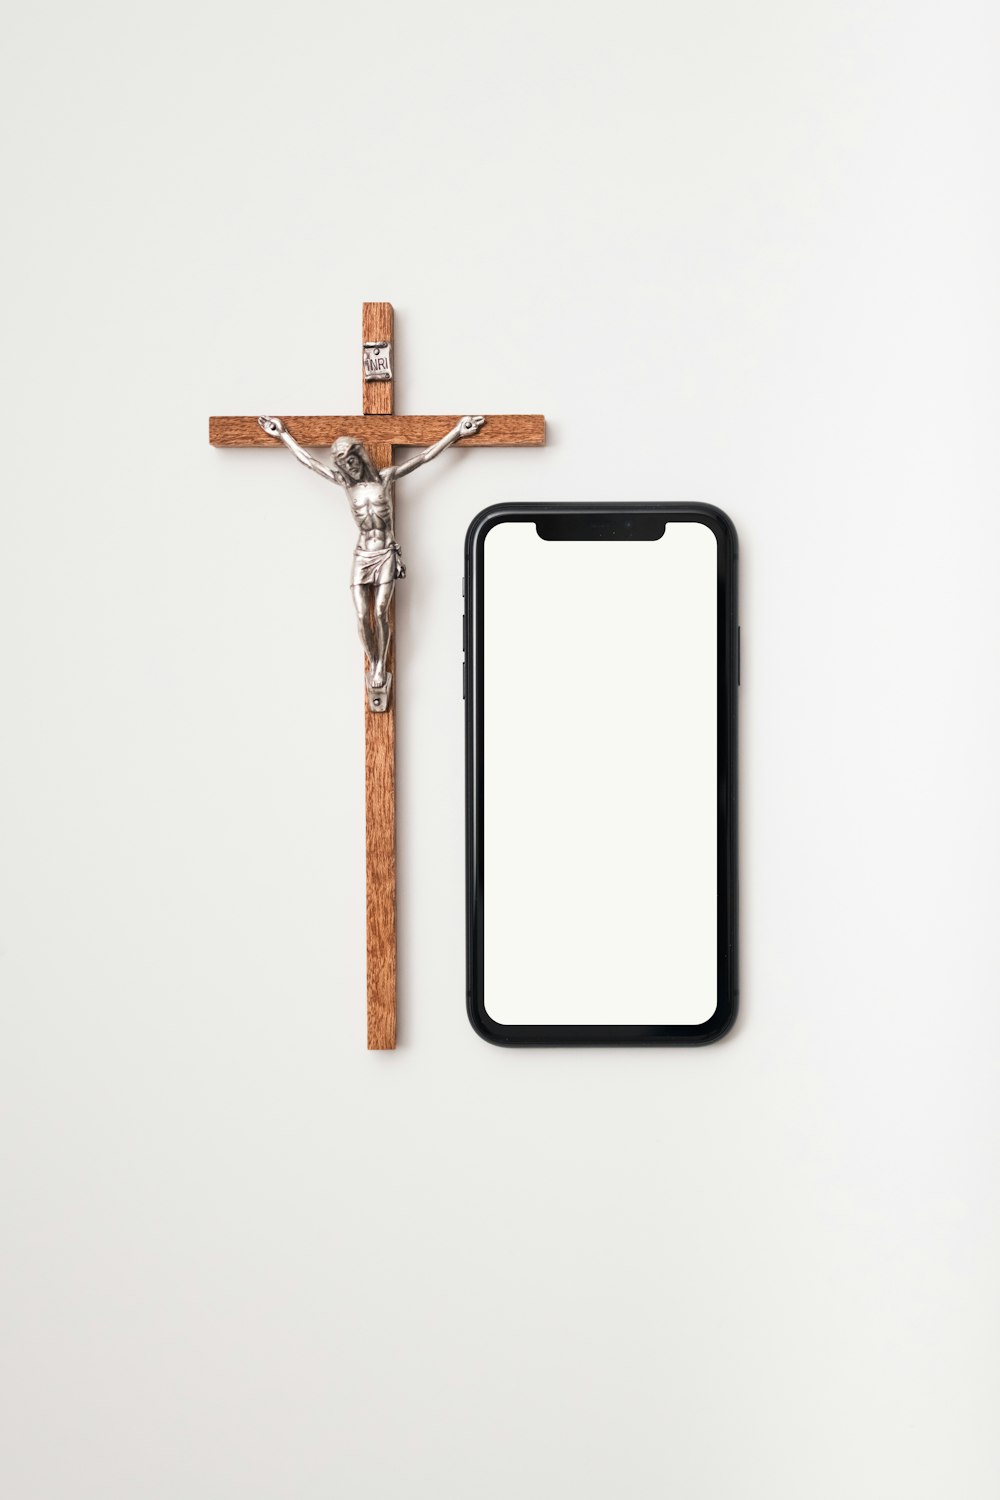 brown wooden cross with white background